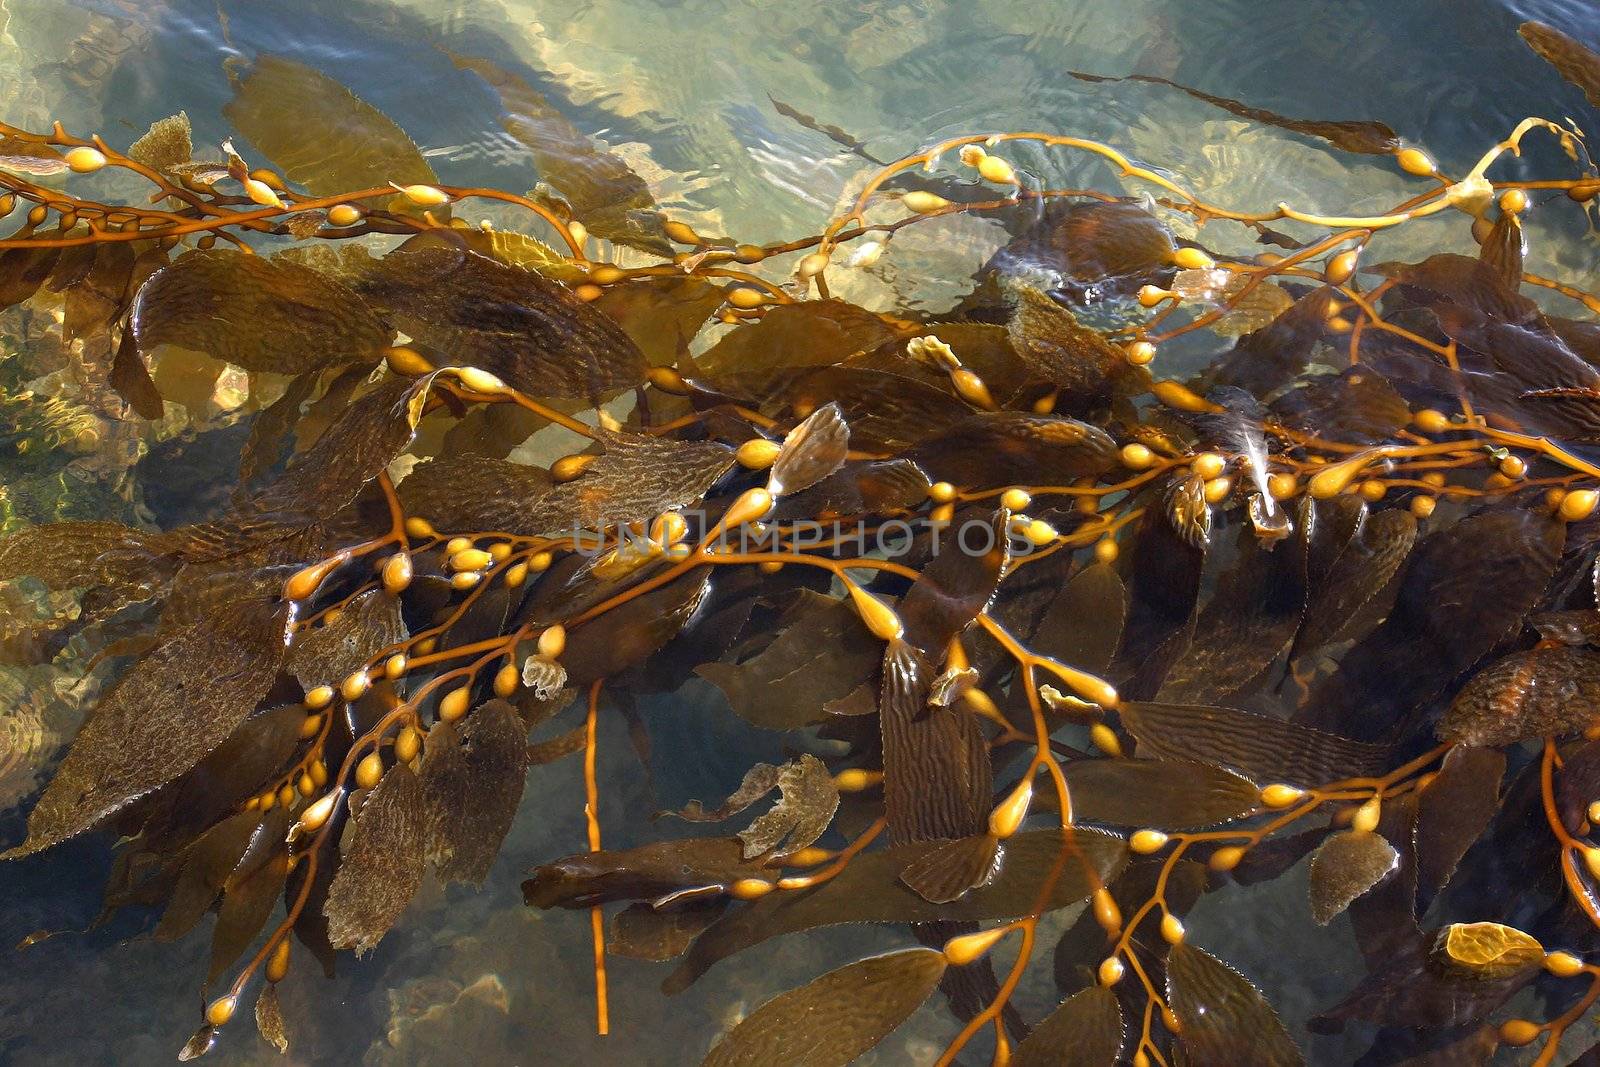 SeaWeed also known as Kelp floating in the water